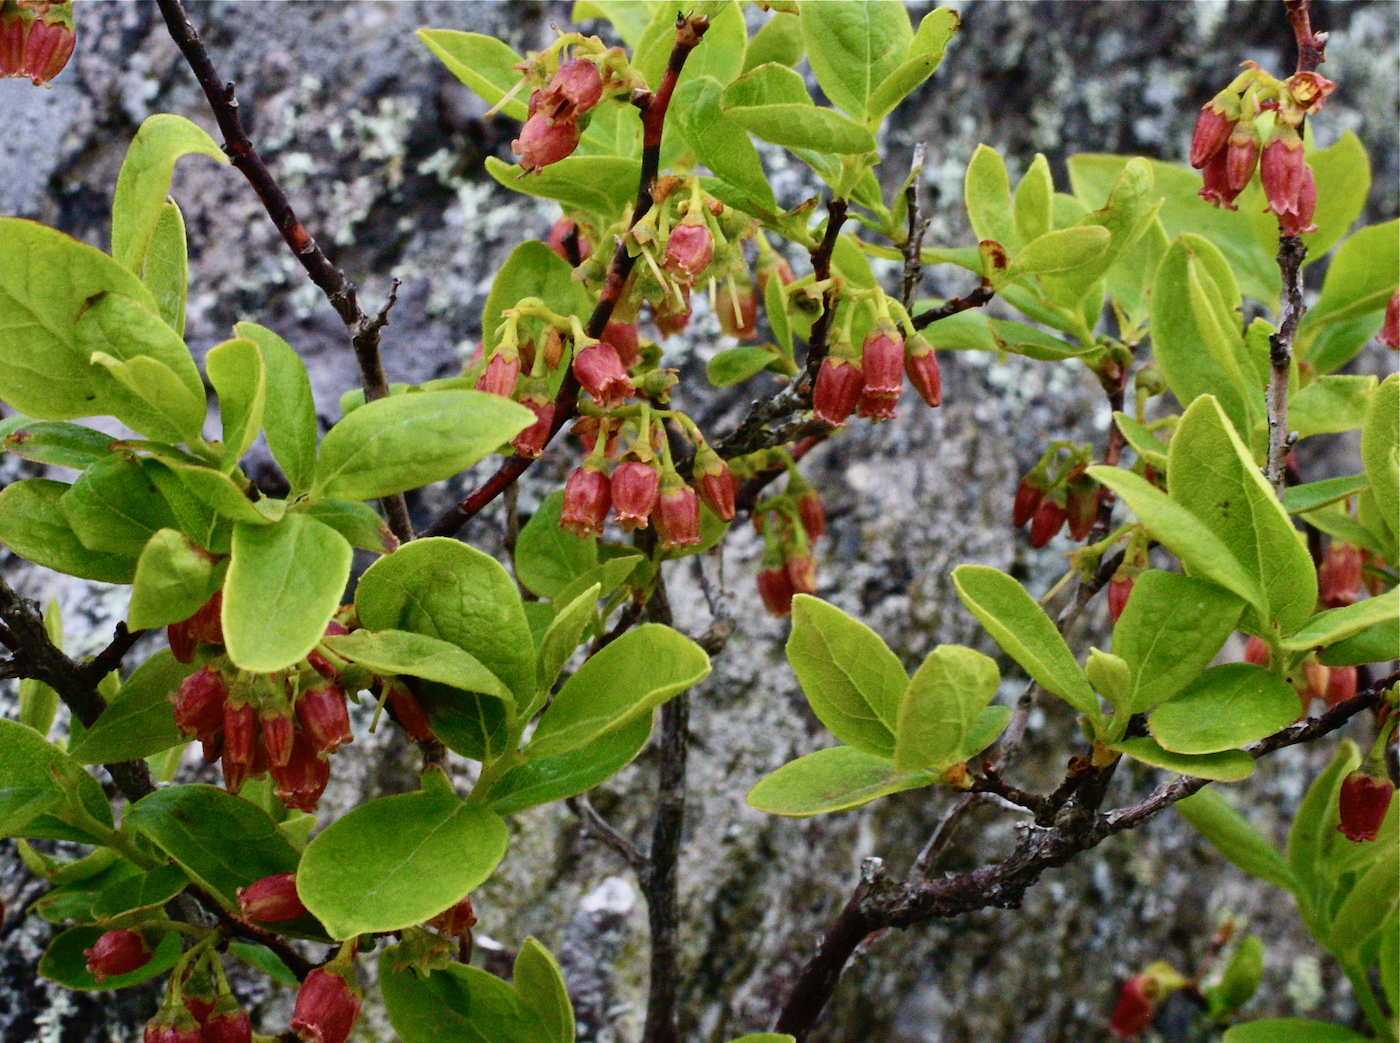 The Scientific Name is Gaylussacia baccata. You will likely hear them called Black Huckleberry, Crackleberry. This picture shows the Red, bell-shaped flowers; leaves sticky with resin dots of Gaylussacia baccata